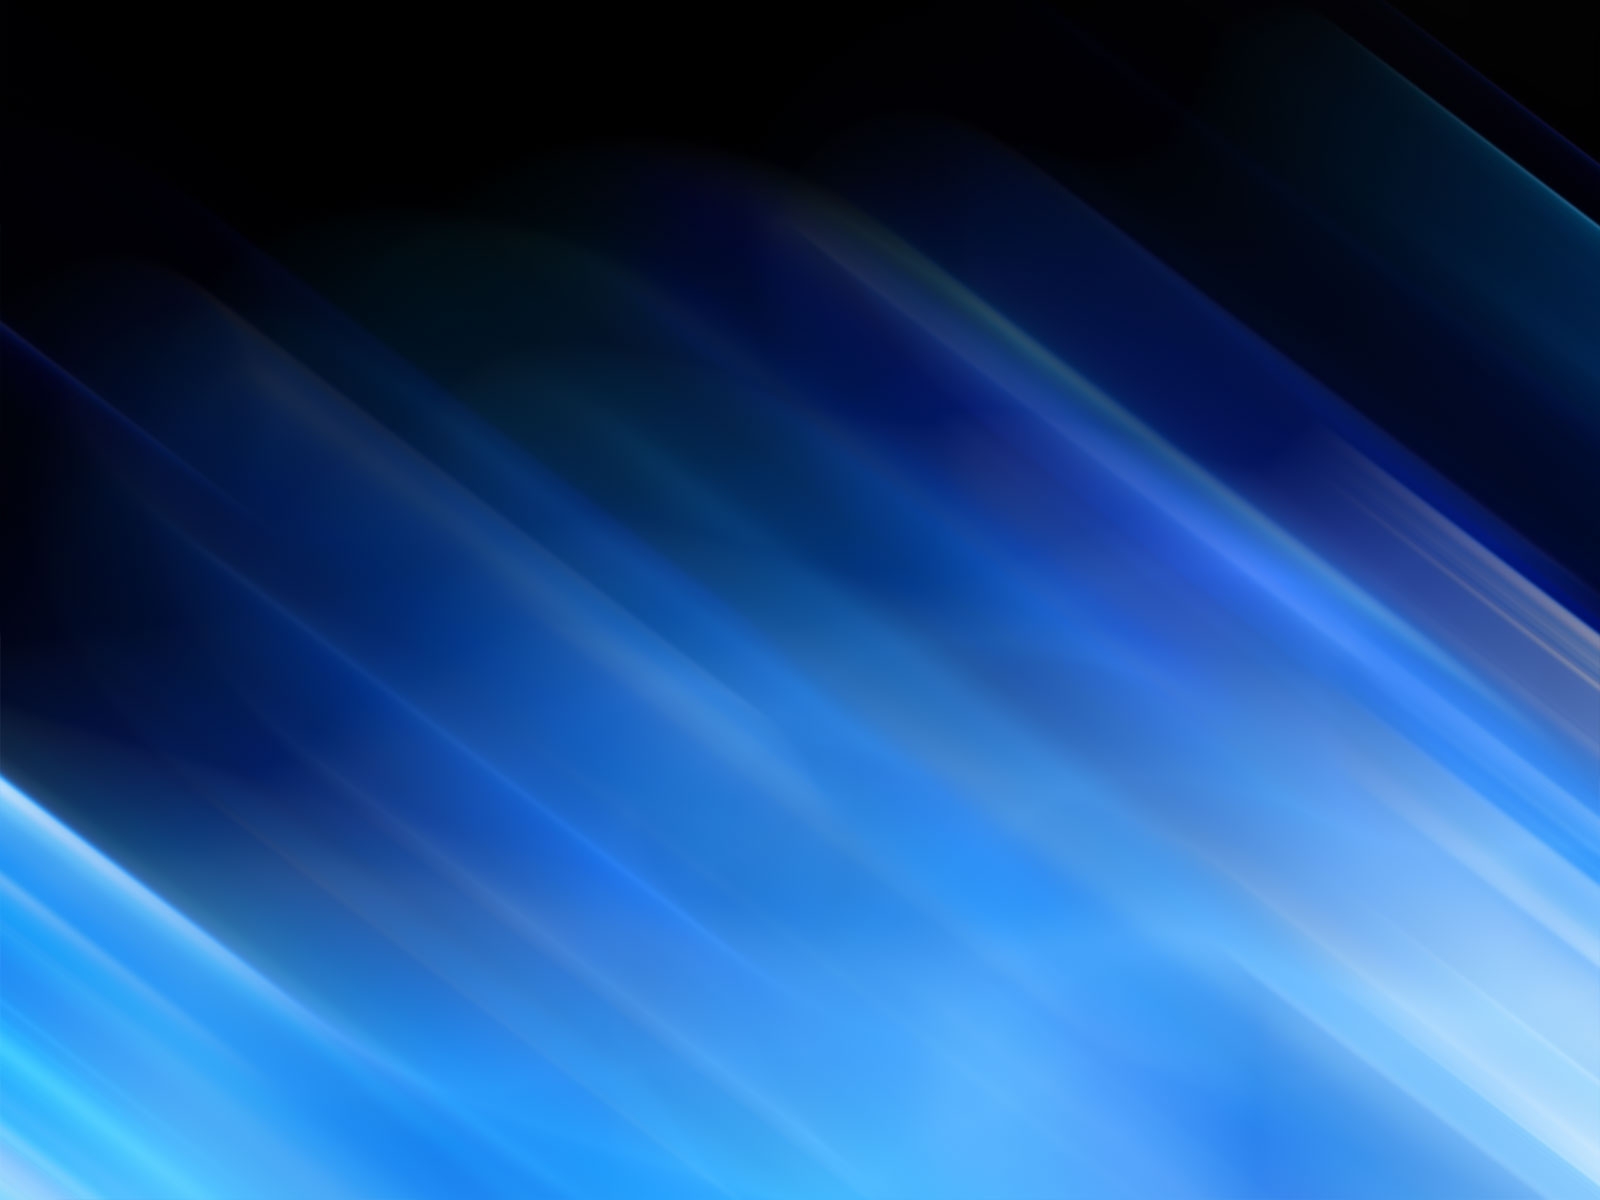 Info Wallpapers hd wallpaper abstract blue